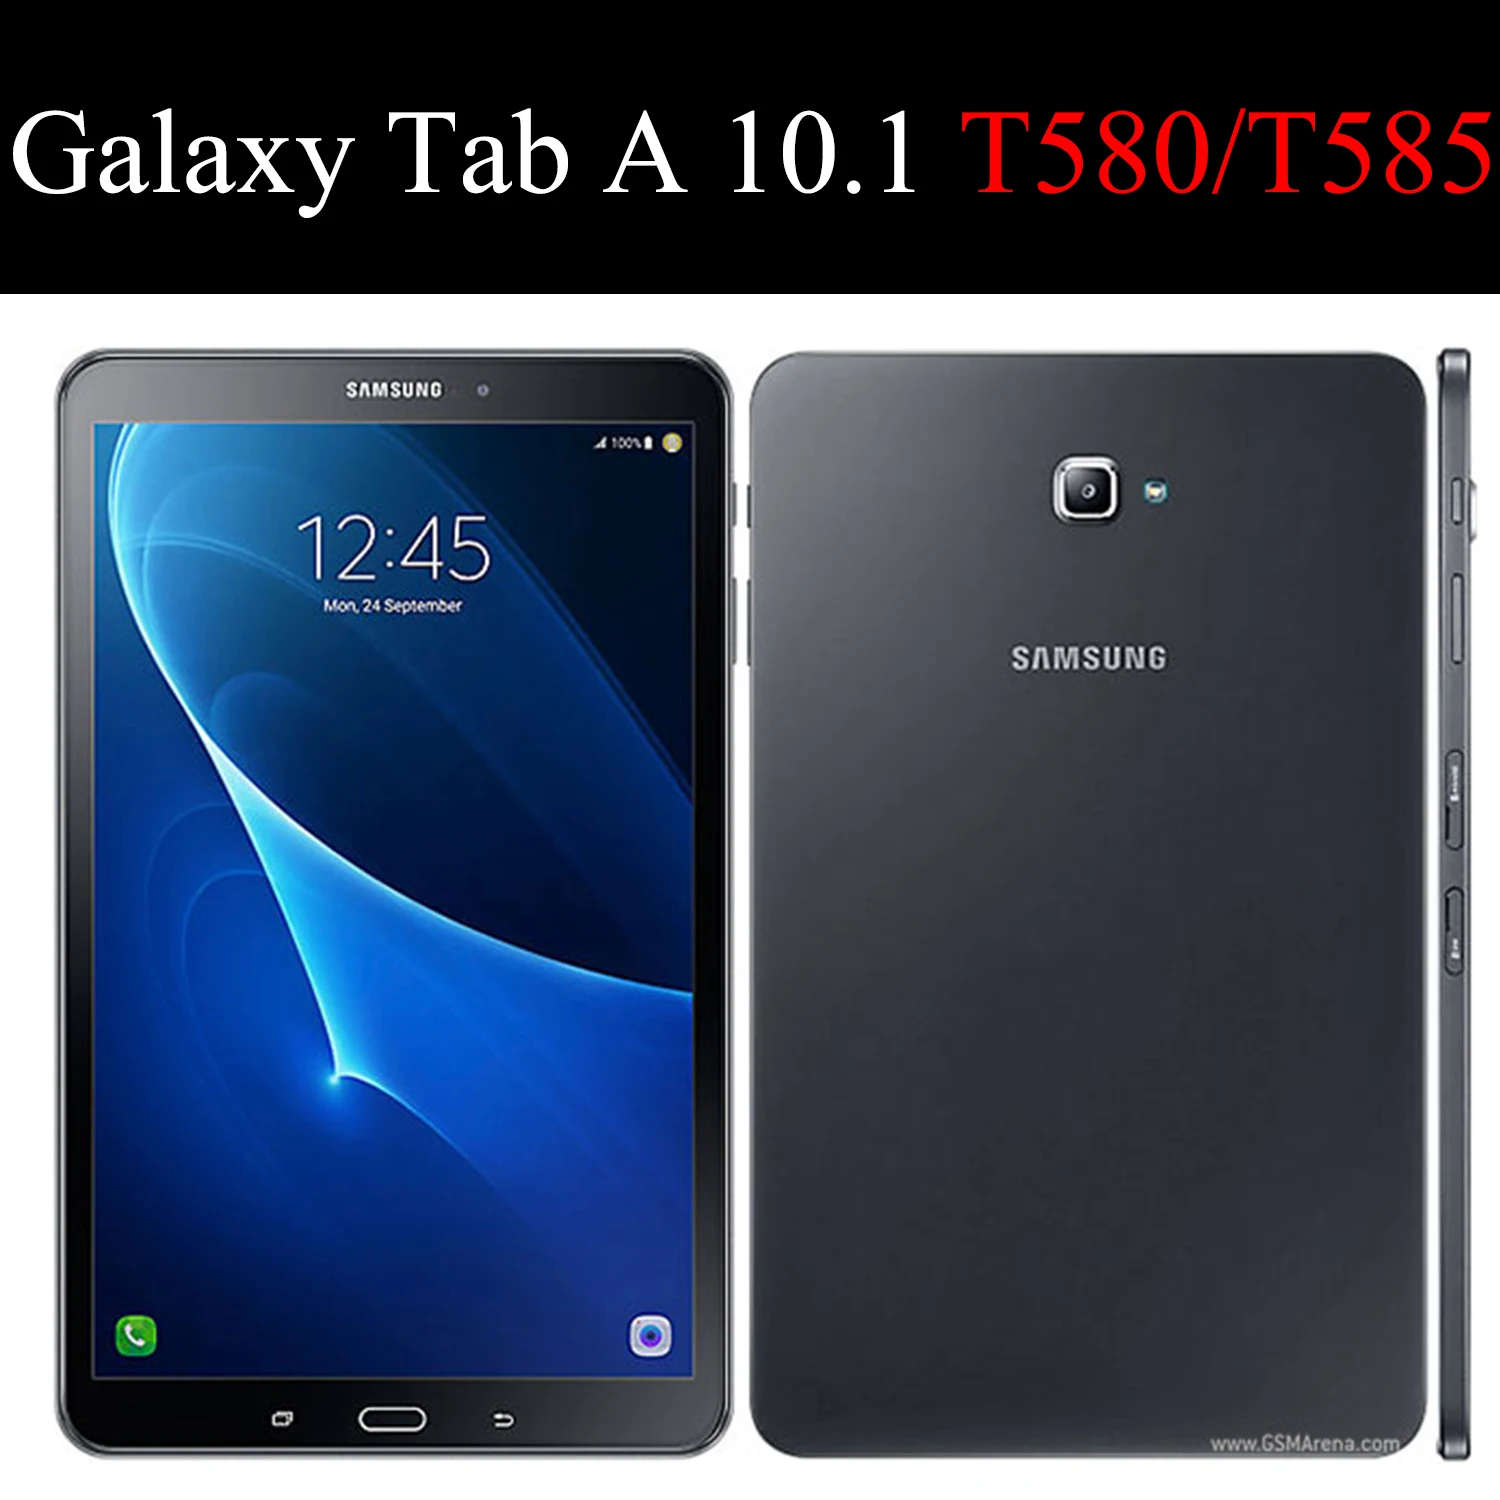 Tablet Tempered glass film For Samsung Galaxy Tab A 10.1" 2016 Proof Explosion prevention Screen Protector 2Pcs SM-T580 T585 images - 6